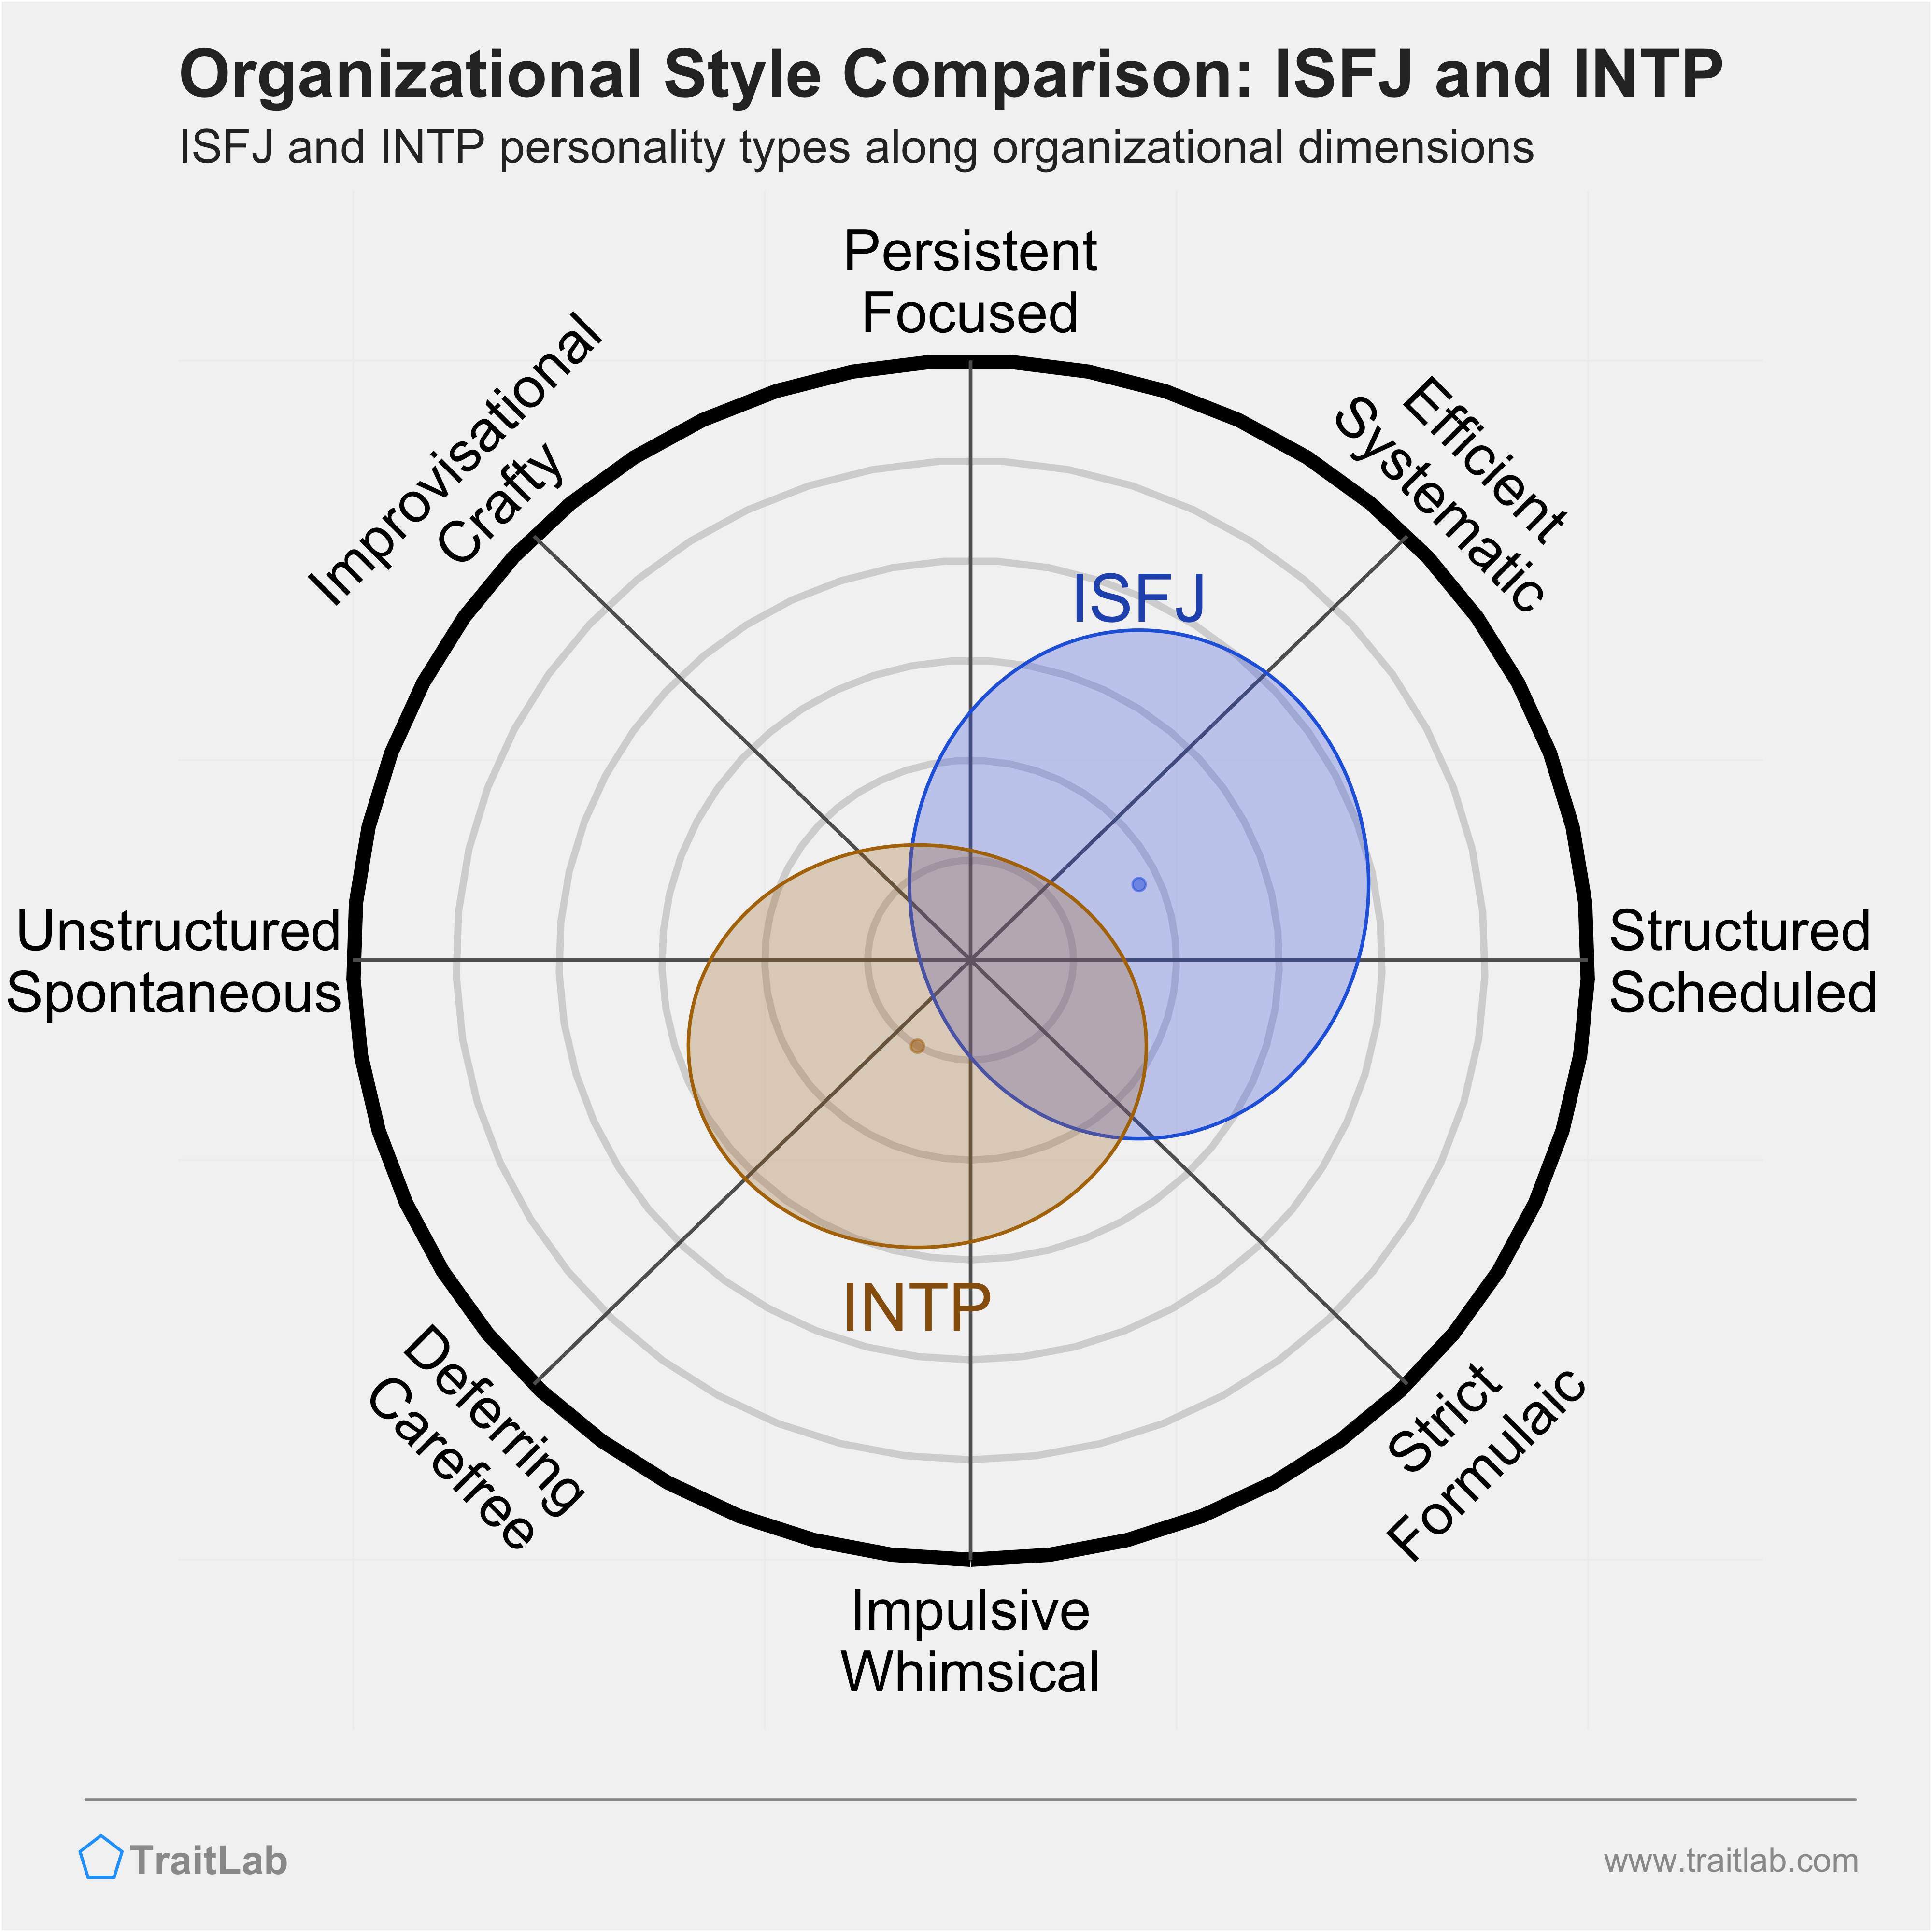 ISFJ and INTP comparison across organizational dimensions